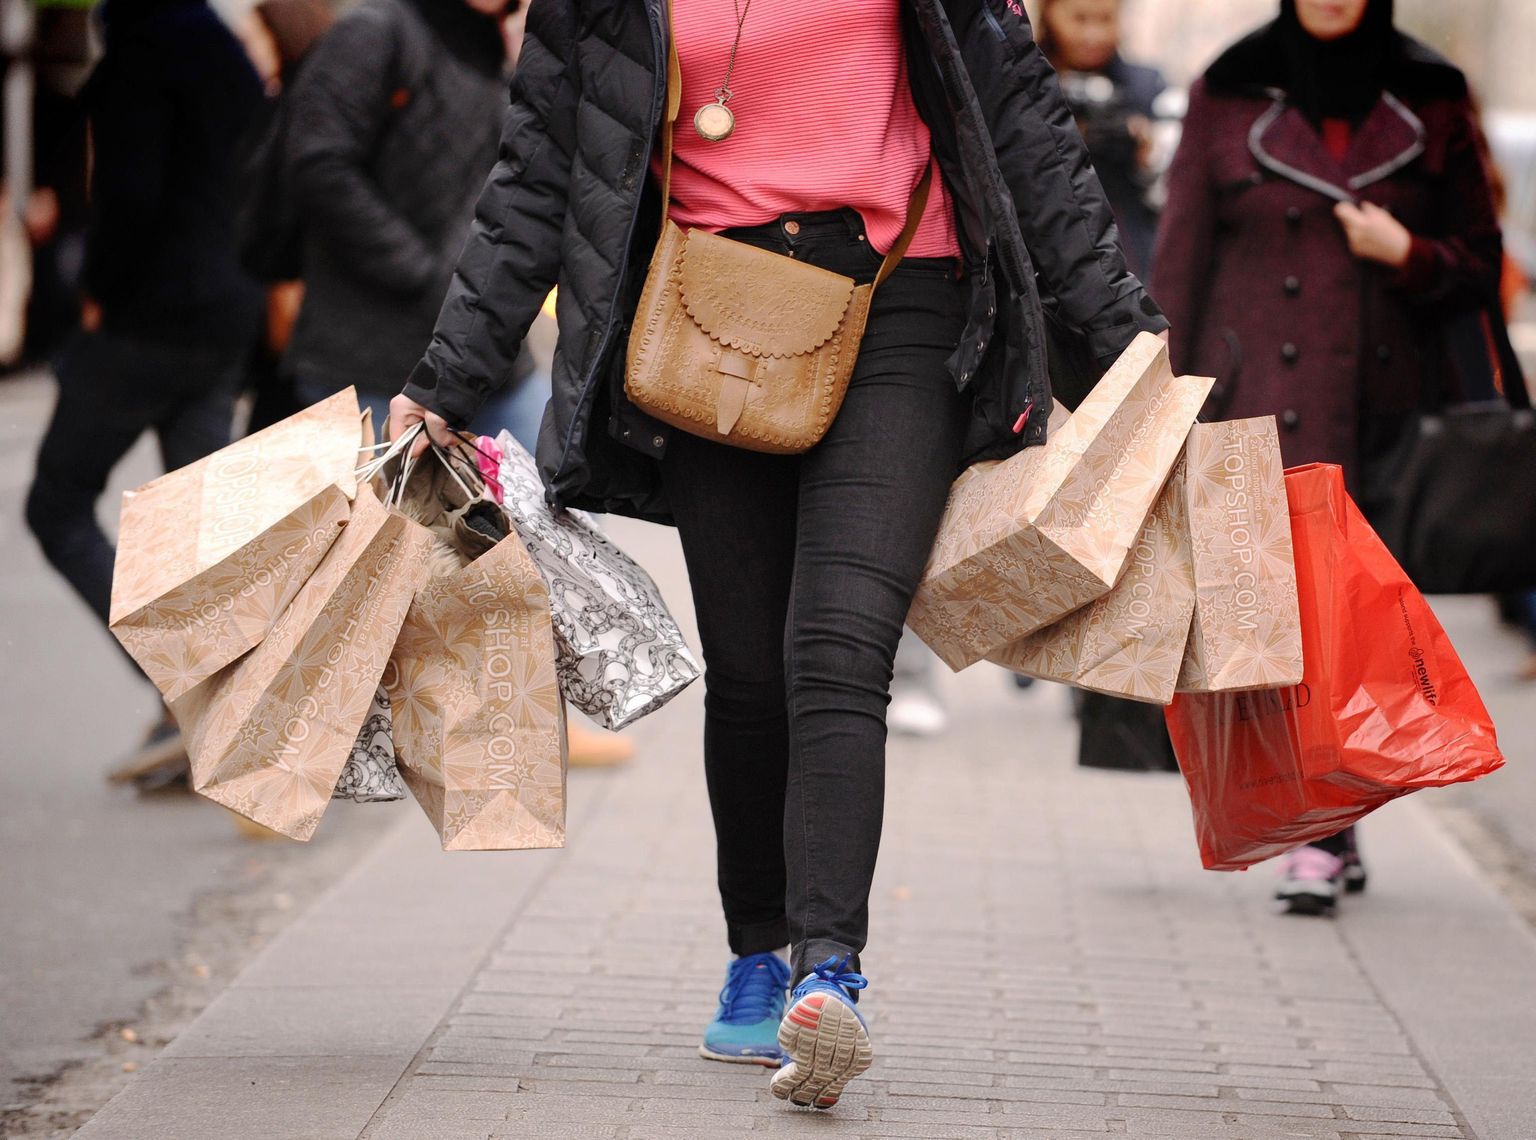 File photo dated 06/12/11 of a person with shopping bags. Retail sales growth flatlined in December - the worst Christmas performance for a decade - according to an index.